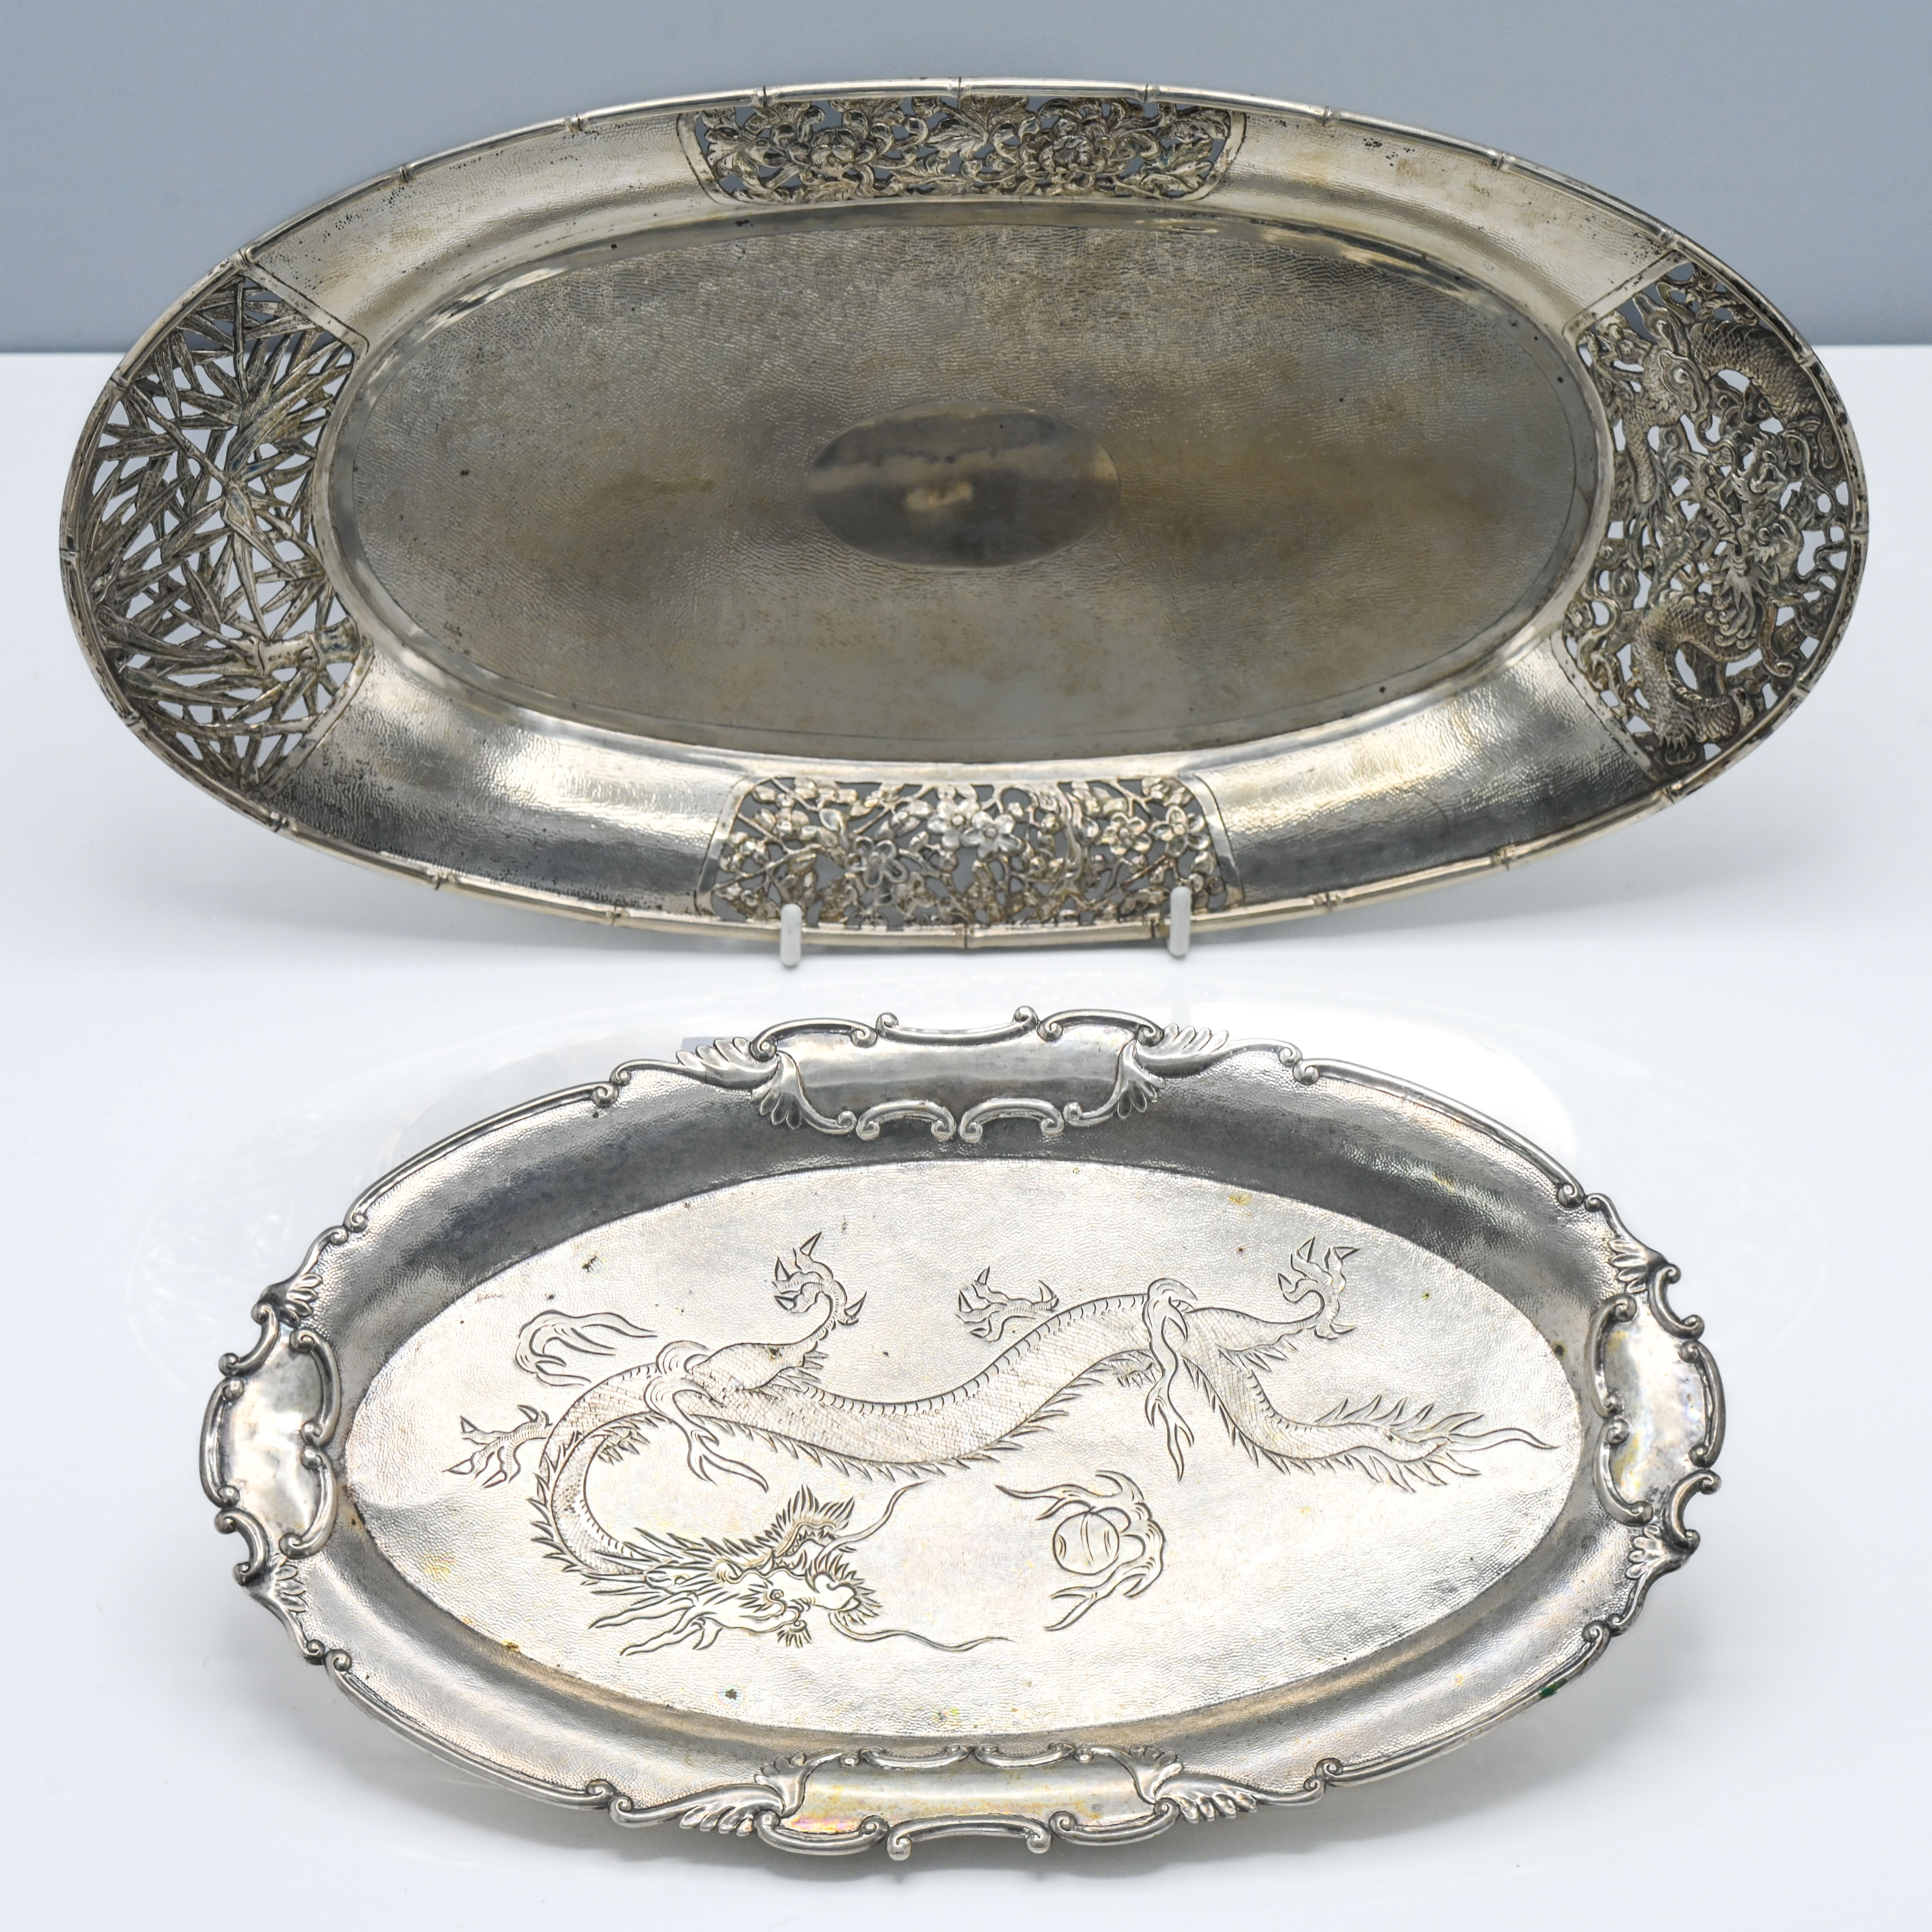 Two oval platters, 19th/20th century, one on four spherical feet